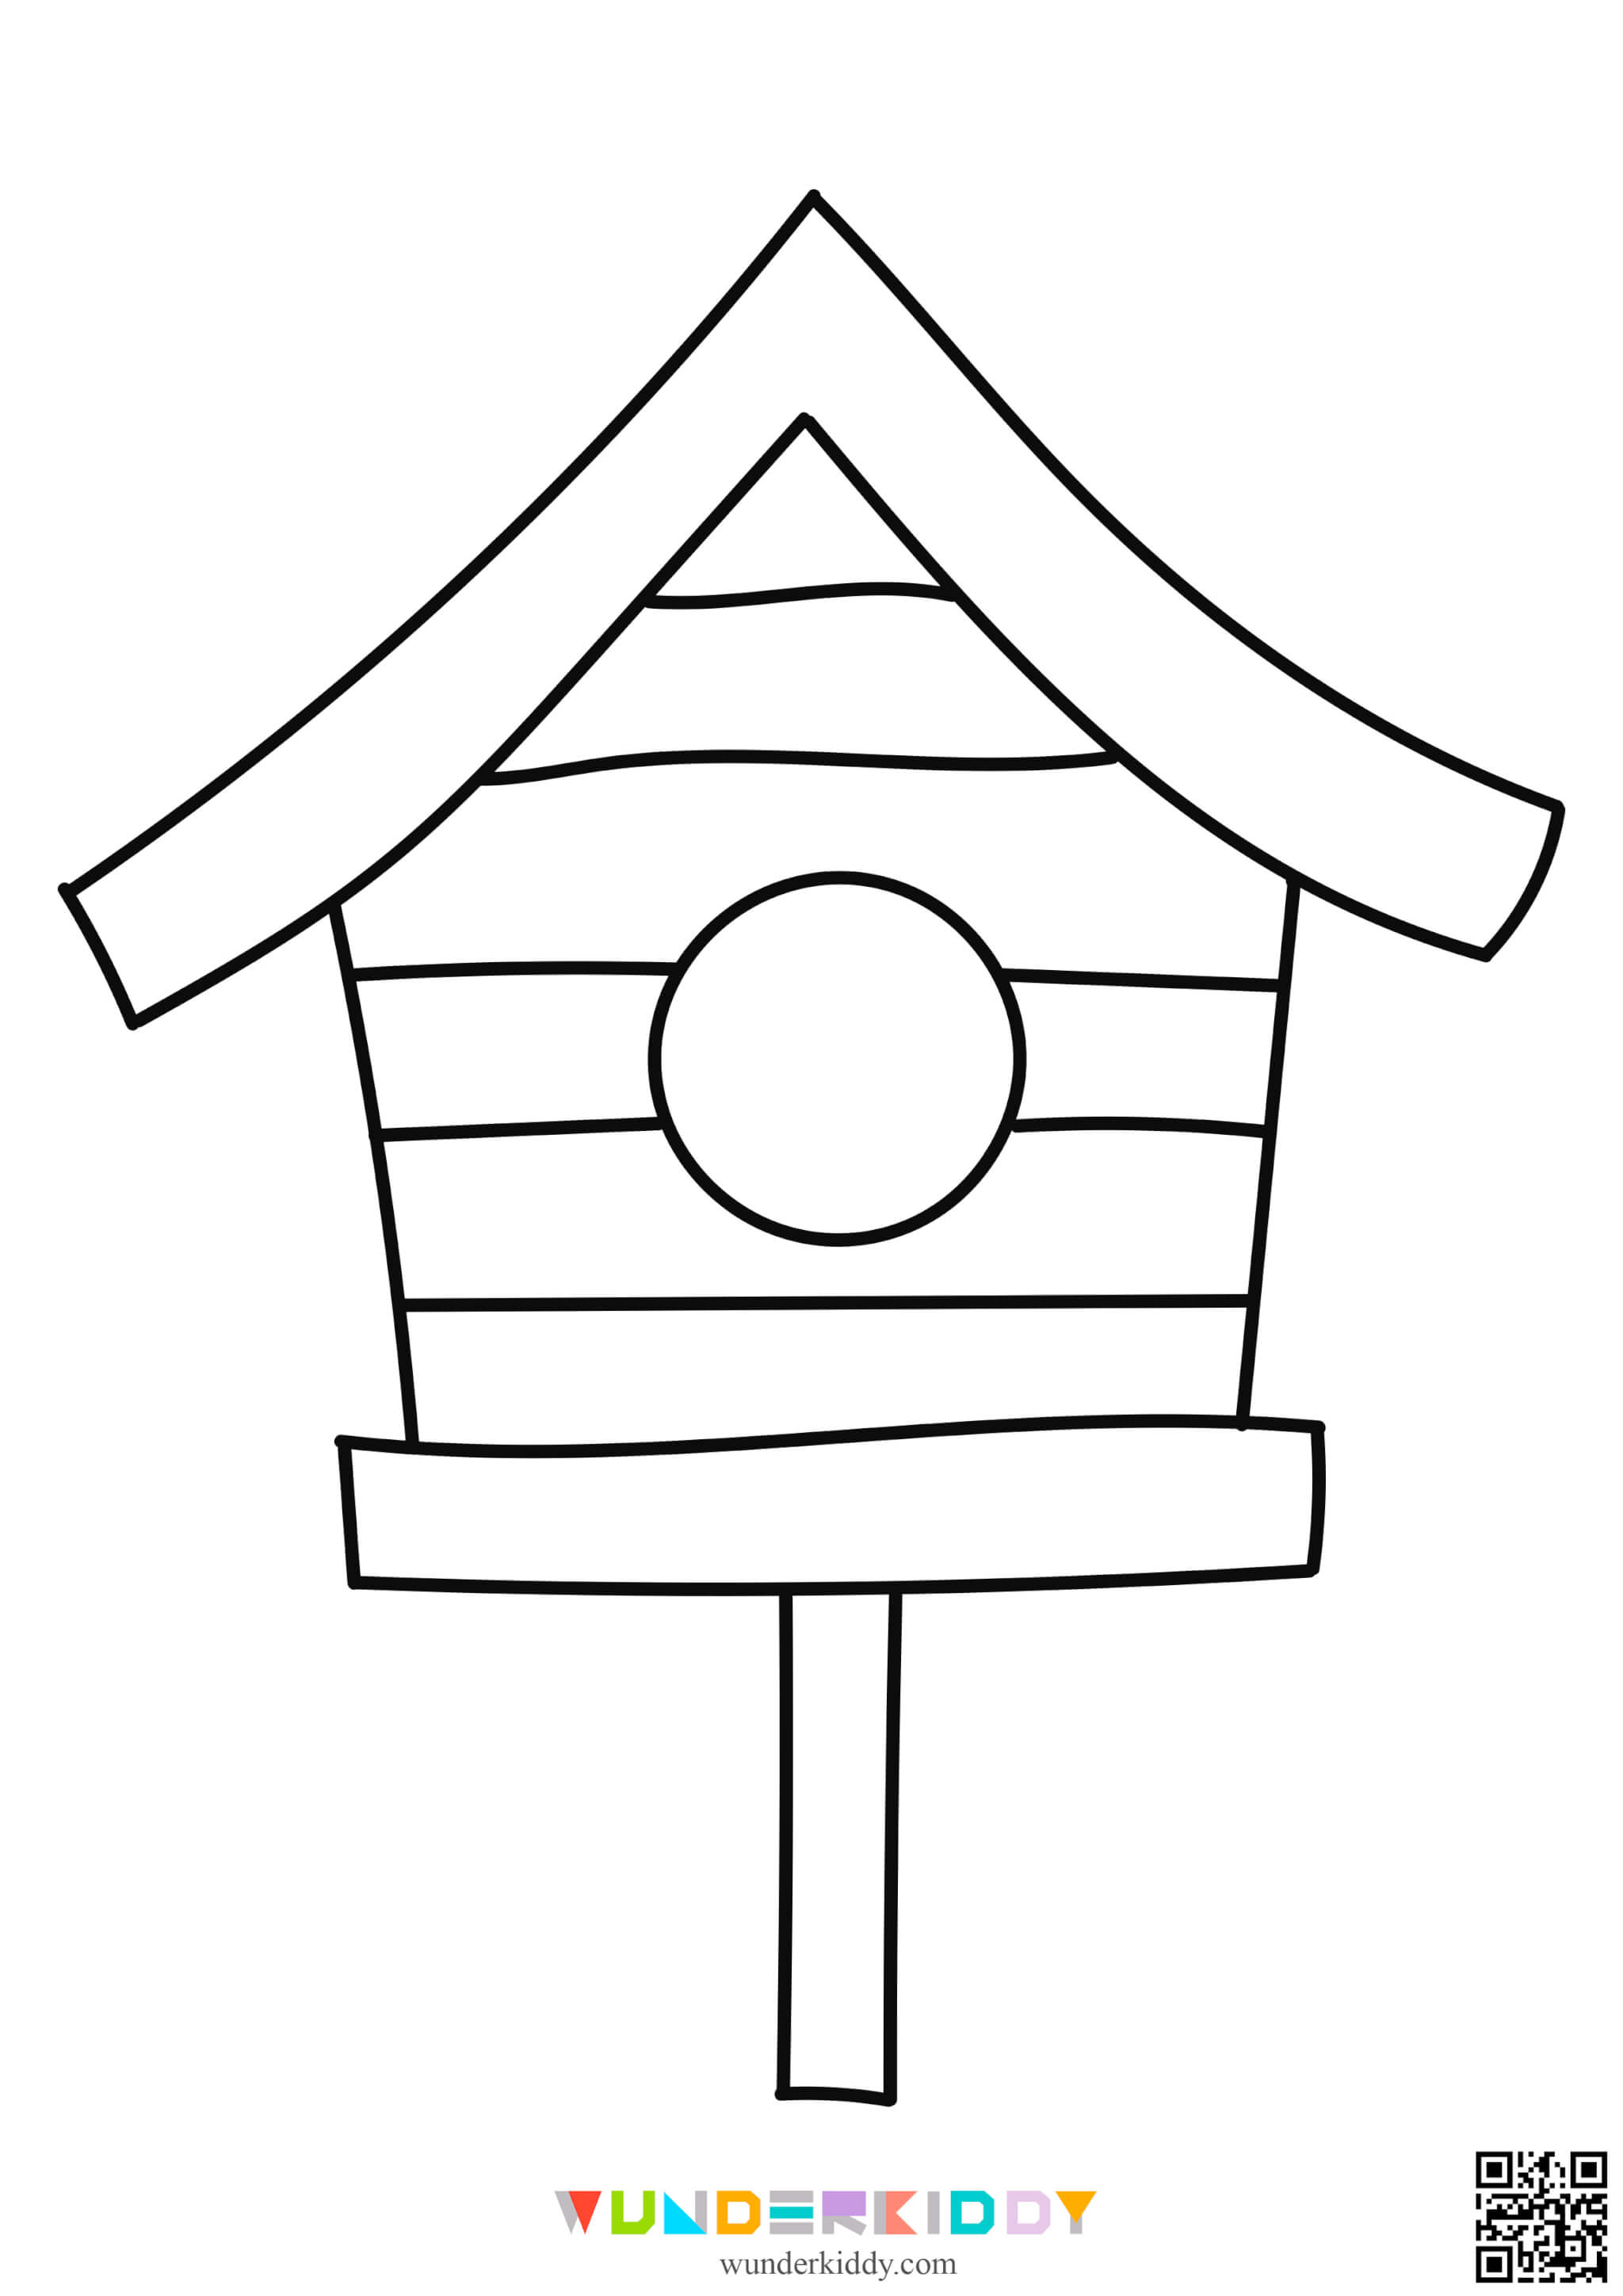 Spring Coloring Pages - Image 17